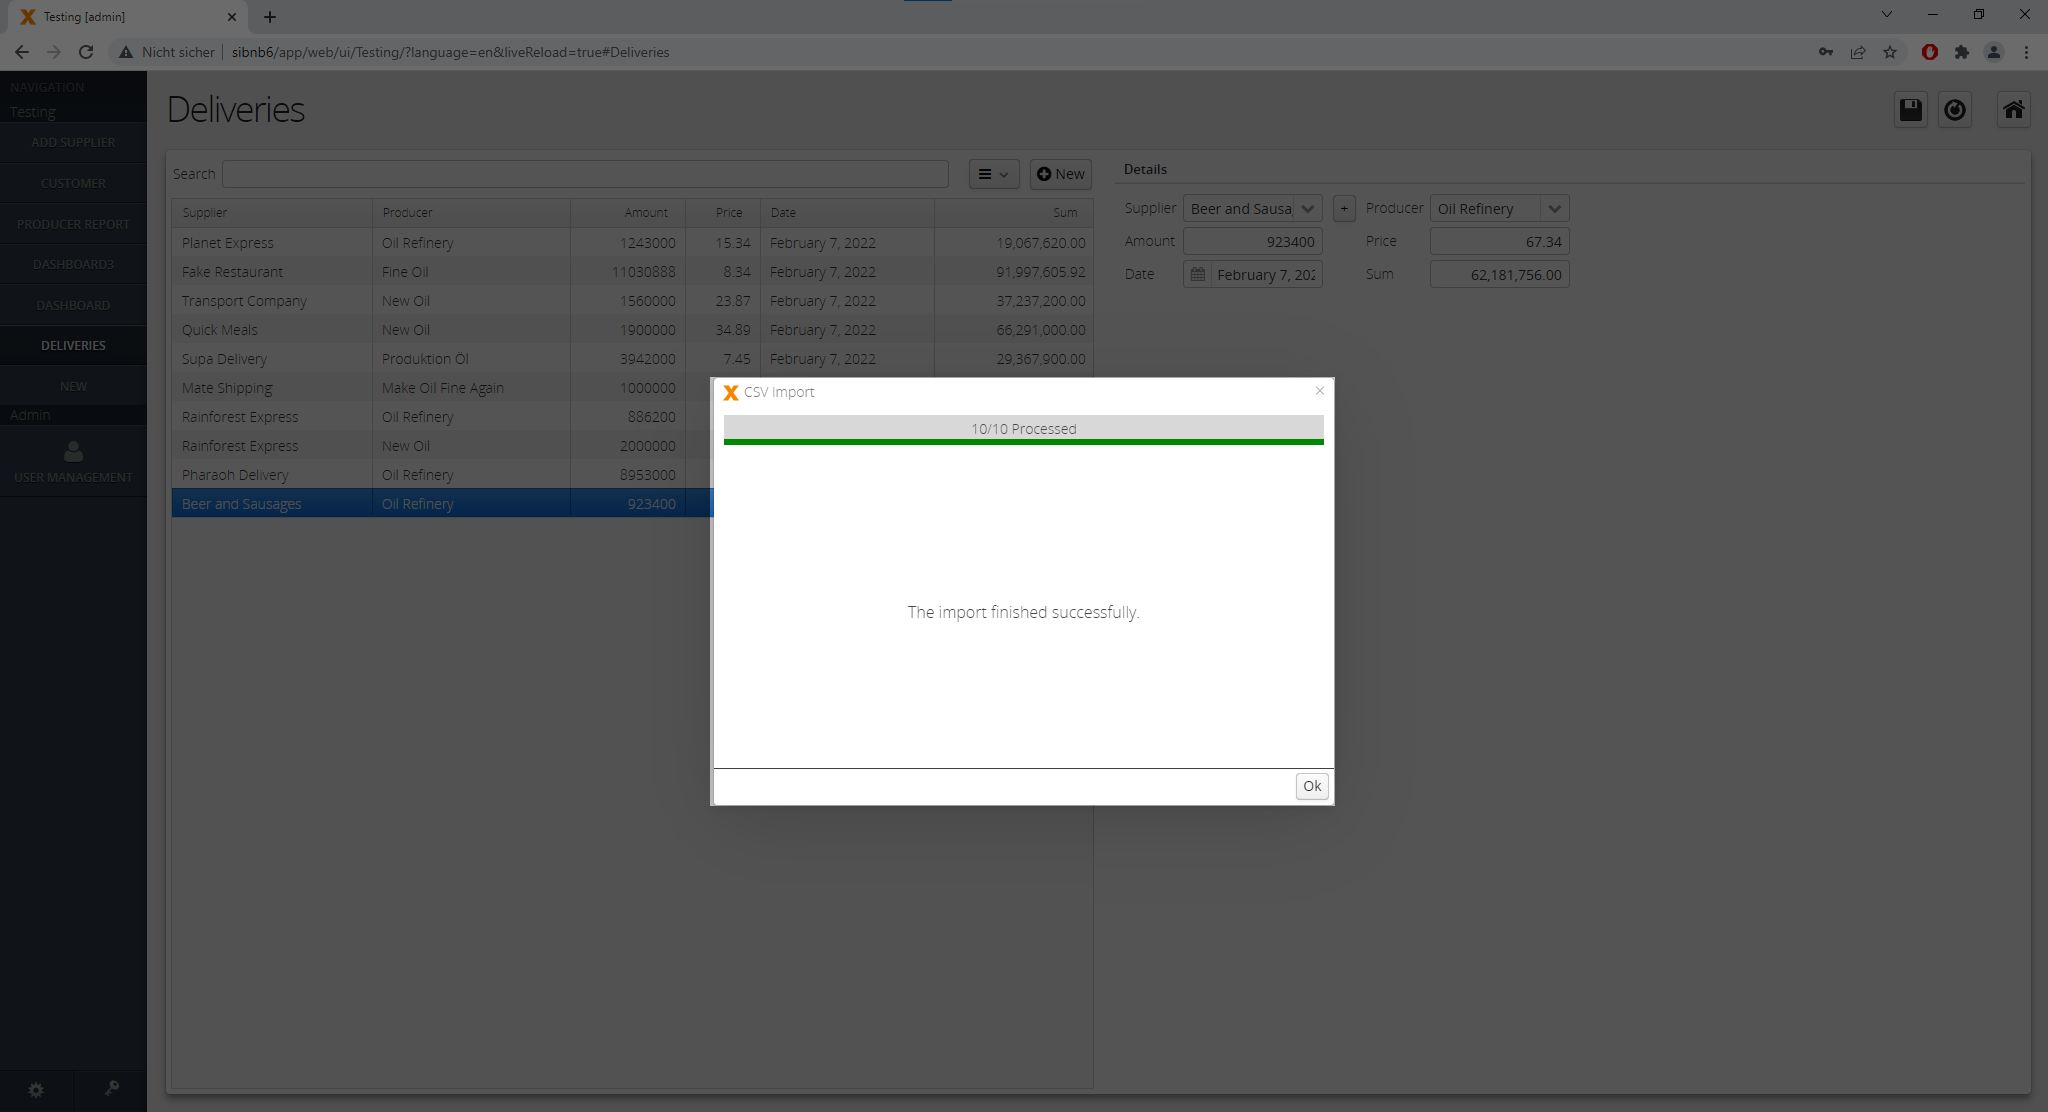 visionx:renewing_oil_application:renewingoil-import-successfully.png